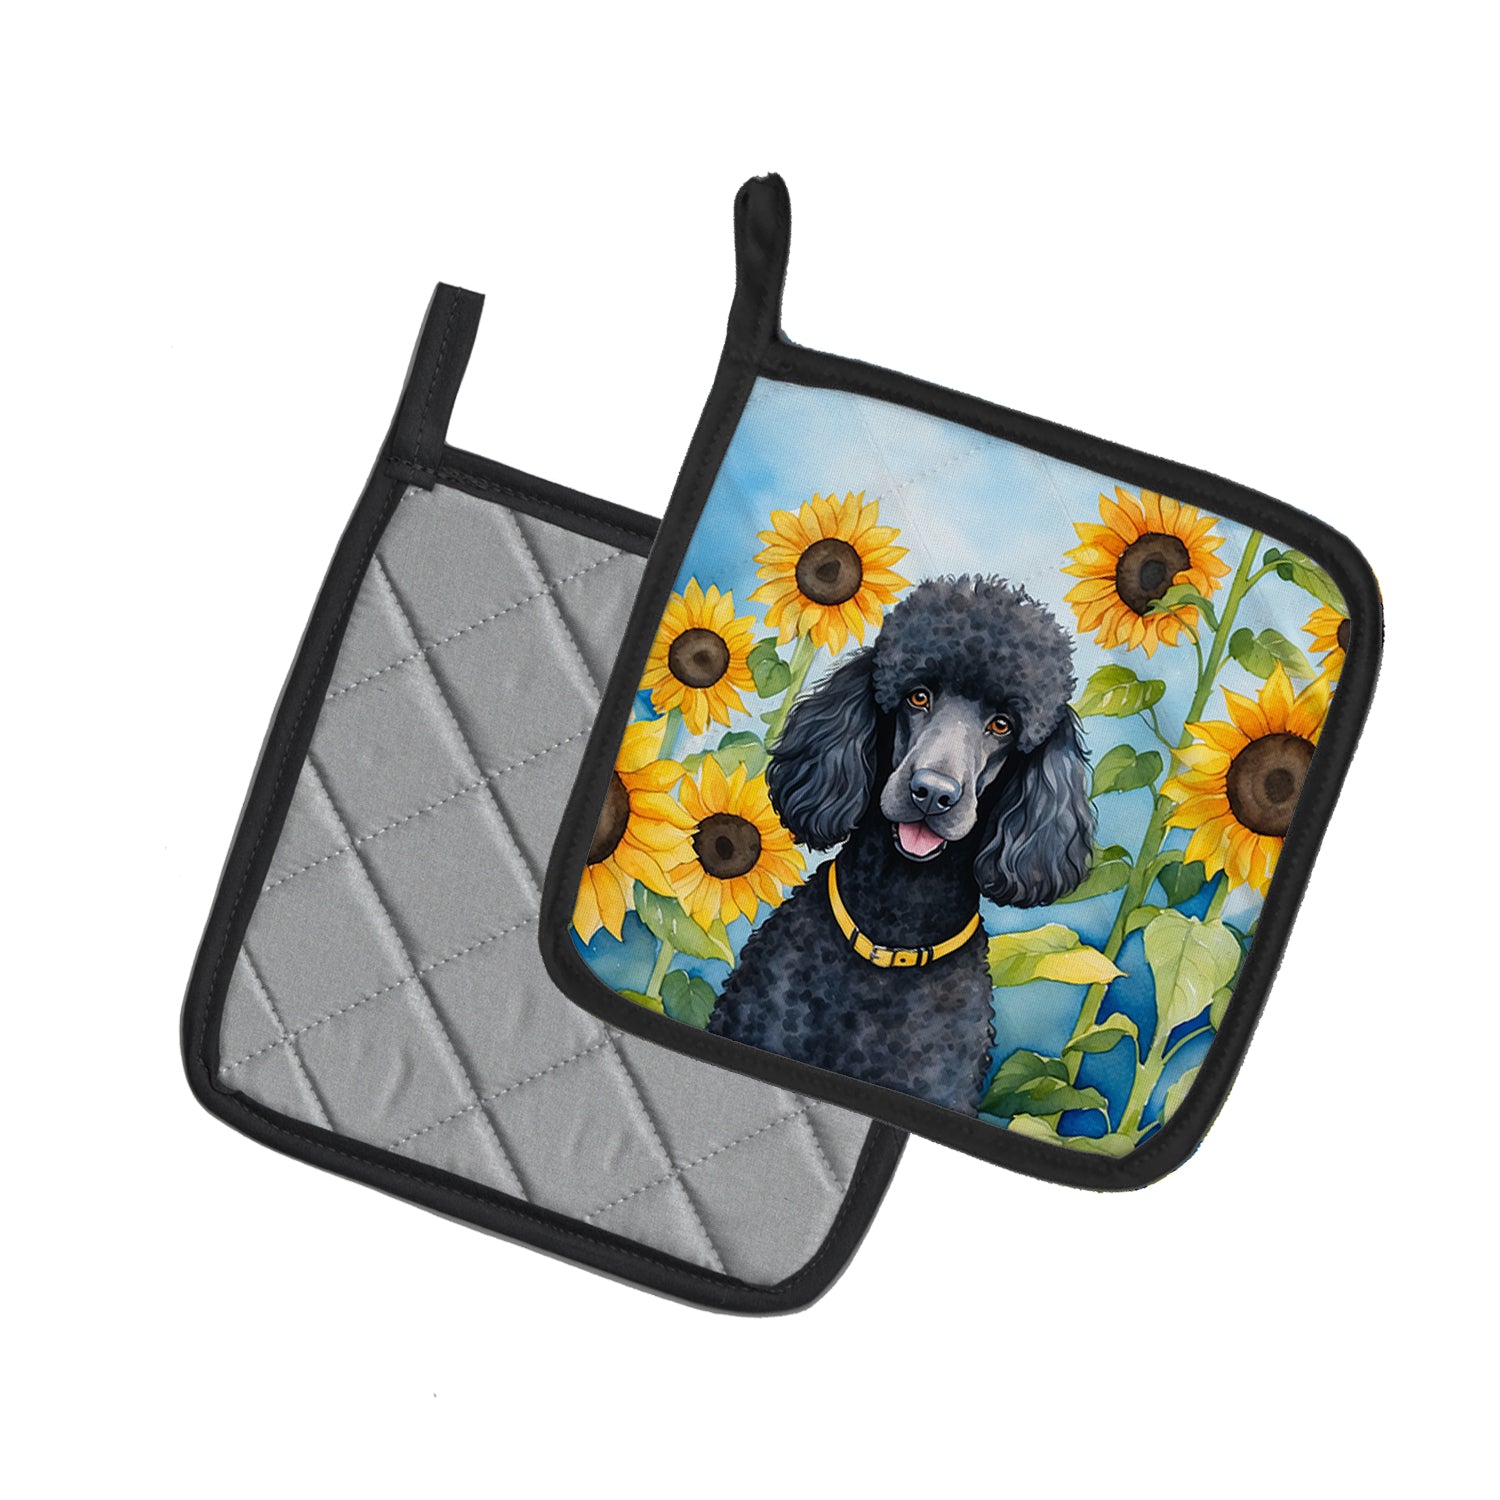 Buy this Black Poodle in Sunflowers Pair of Pot Holders